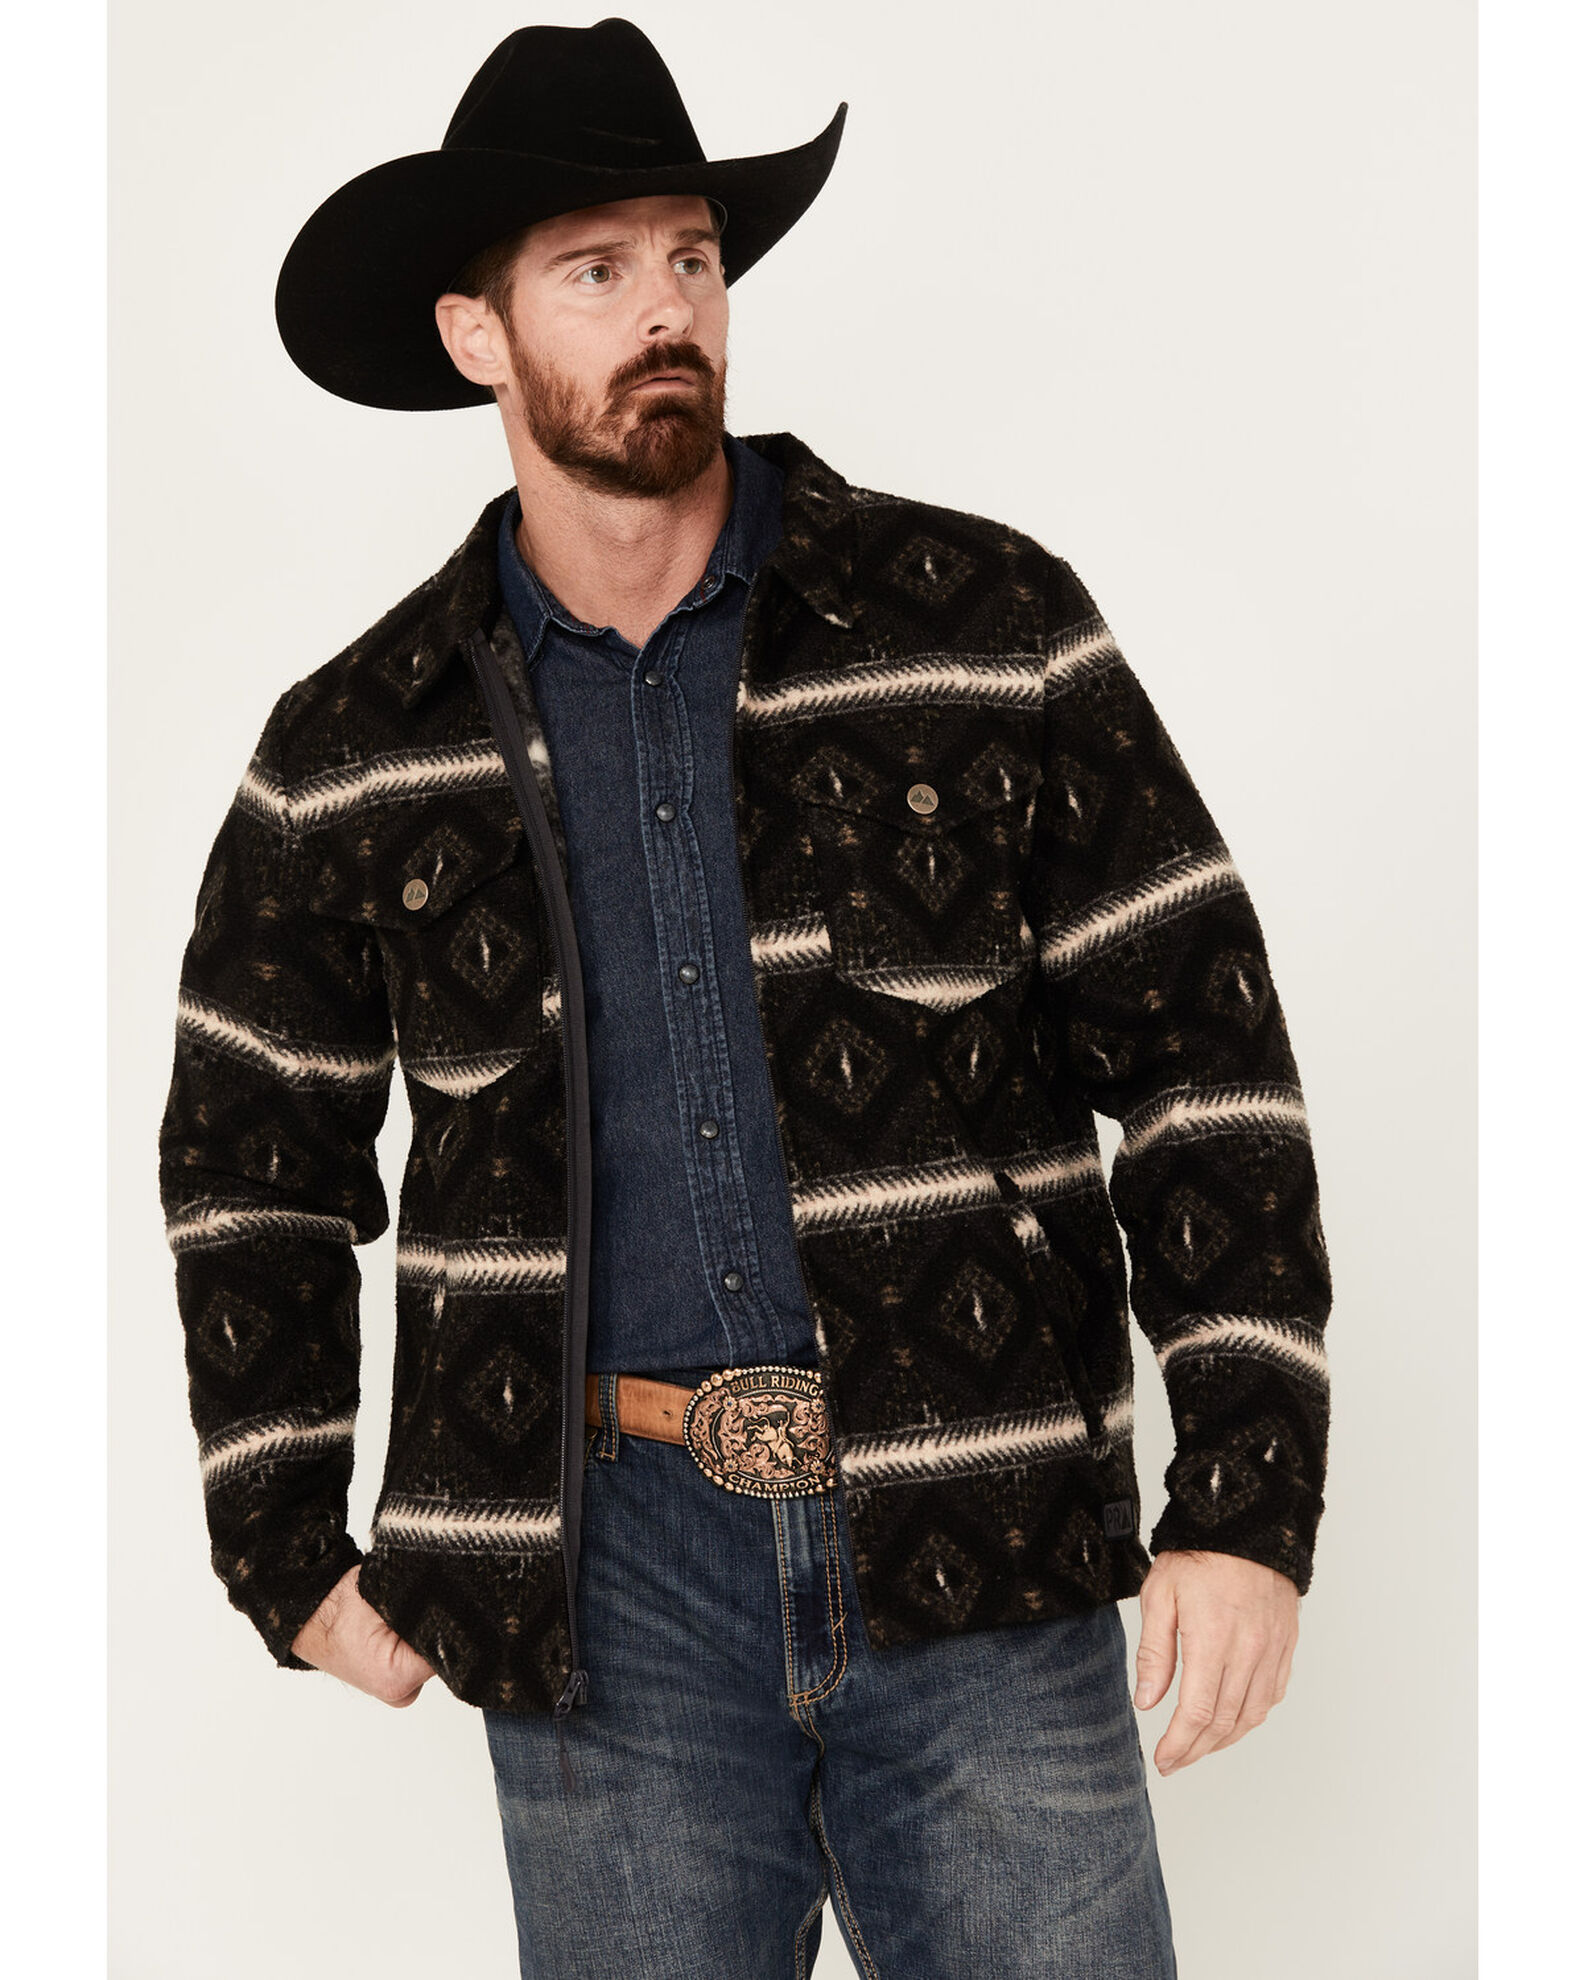 Product Name: Powder River Outfitters by Panhandle Men's Berber ...